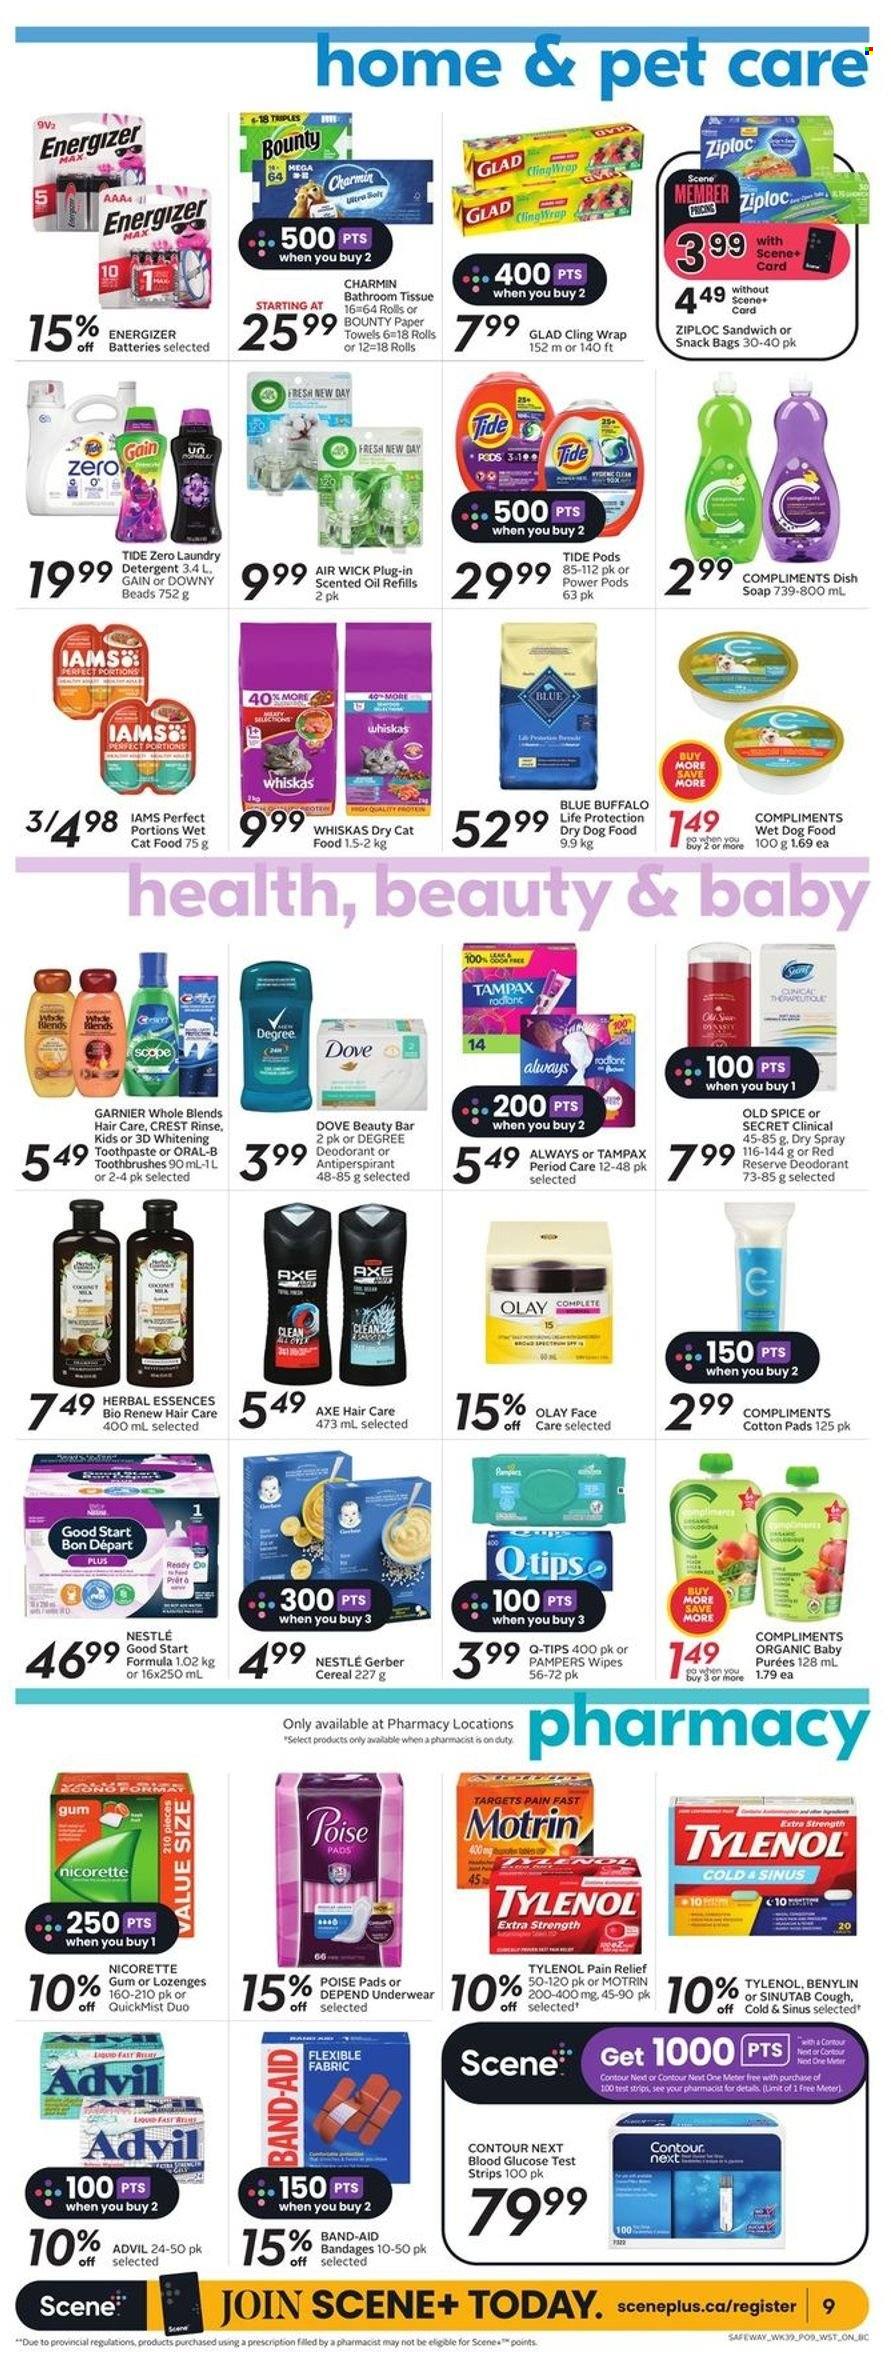 thumbnail - Safeway Flyer - January 26, 2023 - February 01, 2023 - Sales products - sandwich, Dove, Bounty, Gerber, cereals, spice, wipes, Pampers, bath tissue, kitchen towels, paper towels, Charmin, Gain, Tide, laundry detergent, Downy Laundry, soap, toothpaste, Crest, Olay, Herbal Essences, anti-perspirant, Axe, Ziploc, contour, animal food, Blue Buffalo, cat food, dog food, wet dog food, dry dog food, dry cat food, Iams, wet cat food, pain relief, Nicorette, Tylenol, Advil Rapid, Nicorette Gum, Benylin, Motrin, band-aid, detergent, Energizer, Garnier, Nestlé, Tampax, Old Spice, Oral-B, Whiskas, deodorant. Page 10.